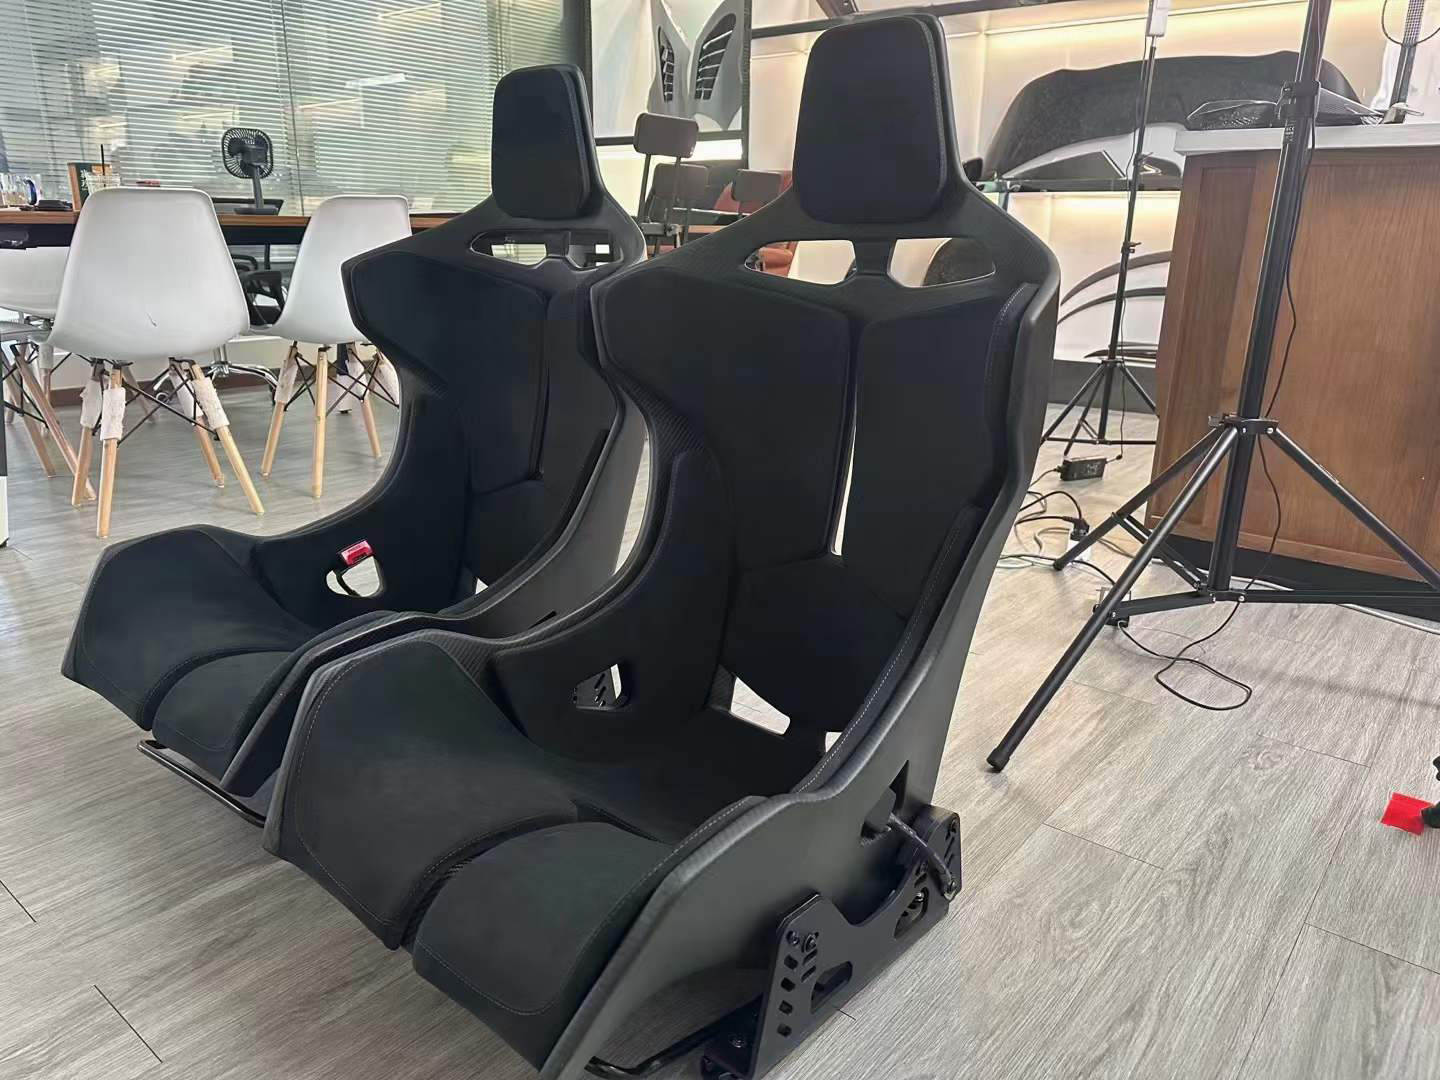 McLaren Senna Style Seats For MP4-12C/570S/600LT/650S/720S/P1 With Side Mount & Bracket & Sliders & Heated Seat